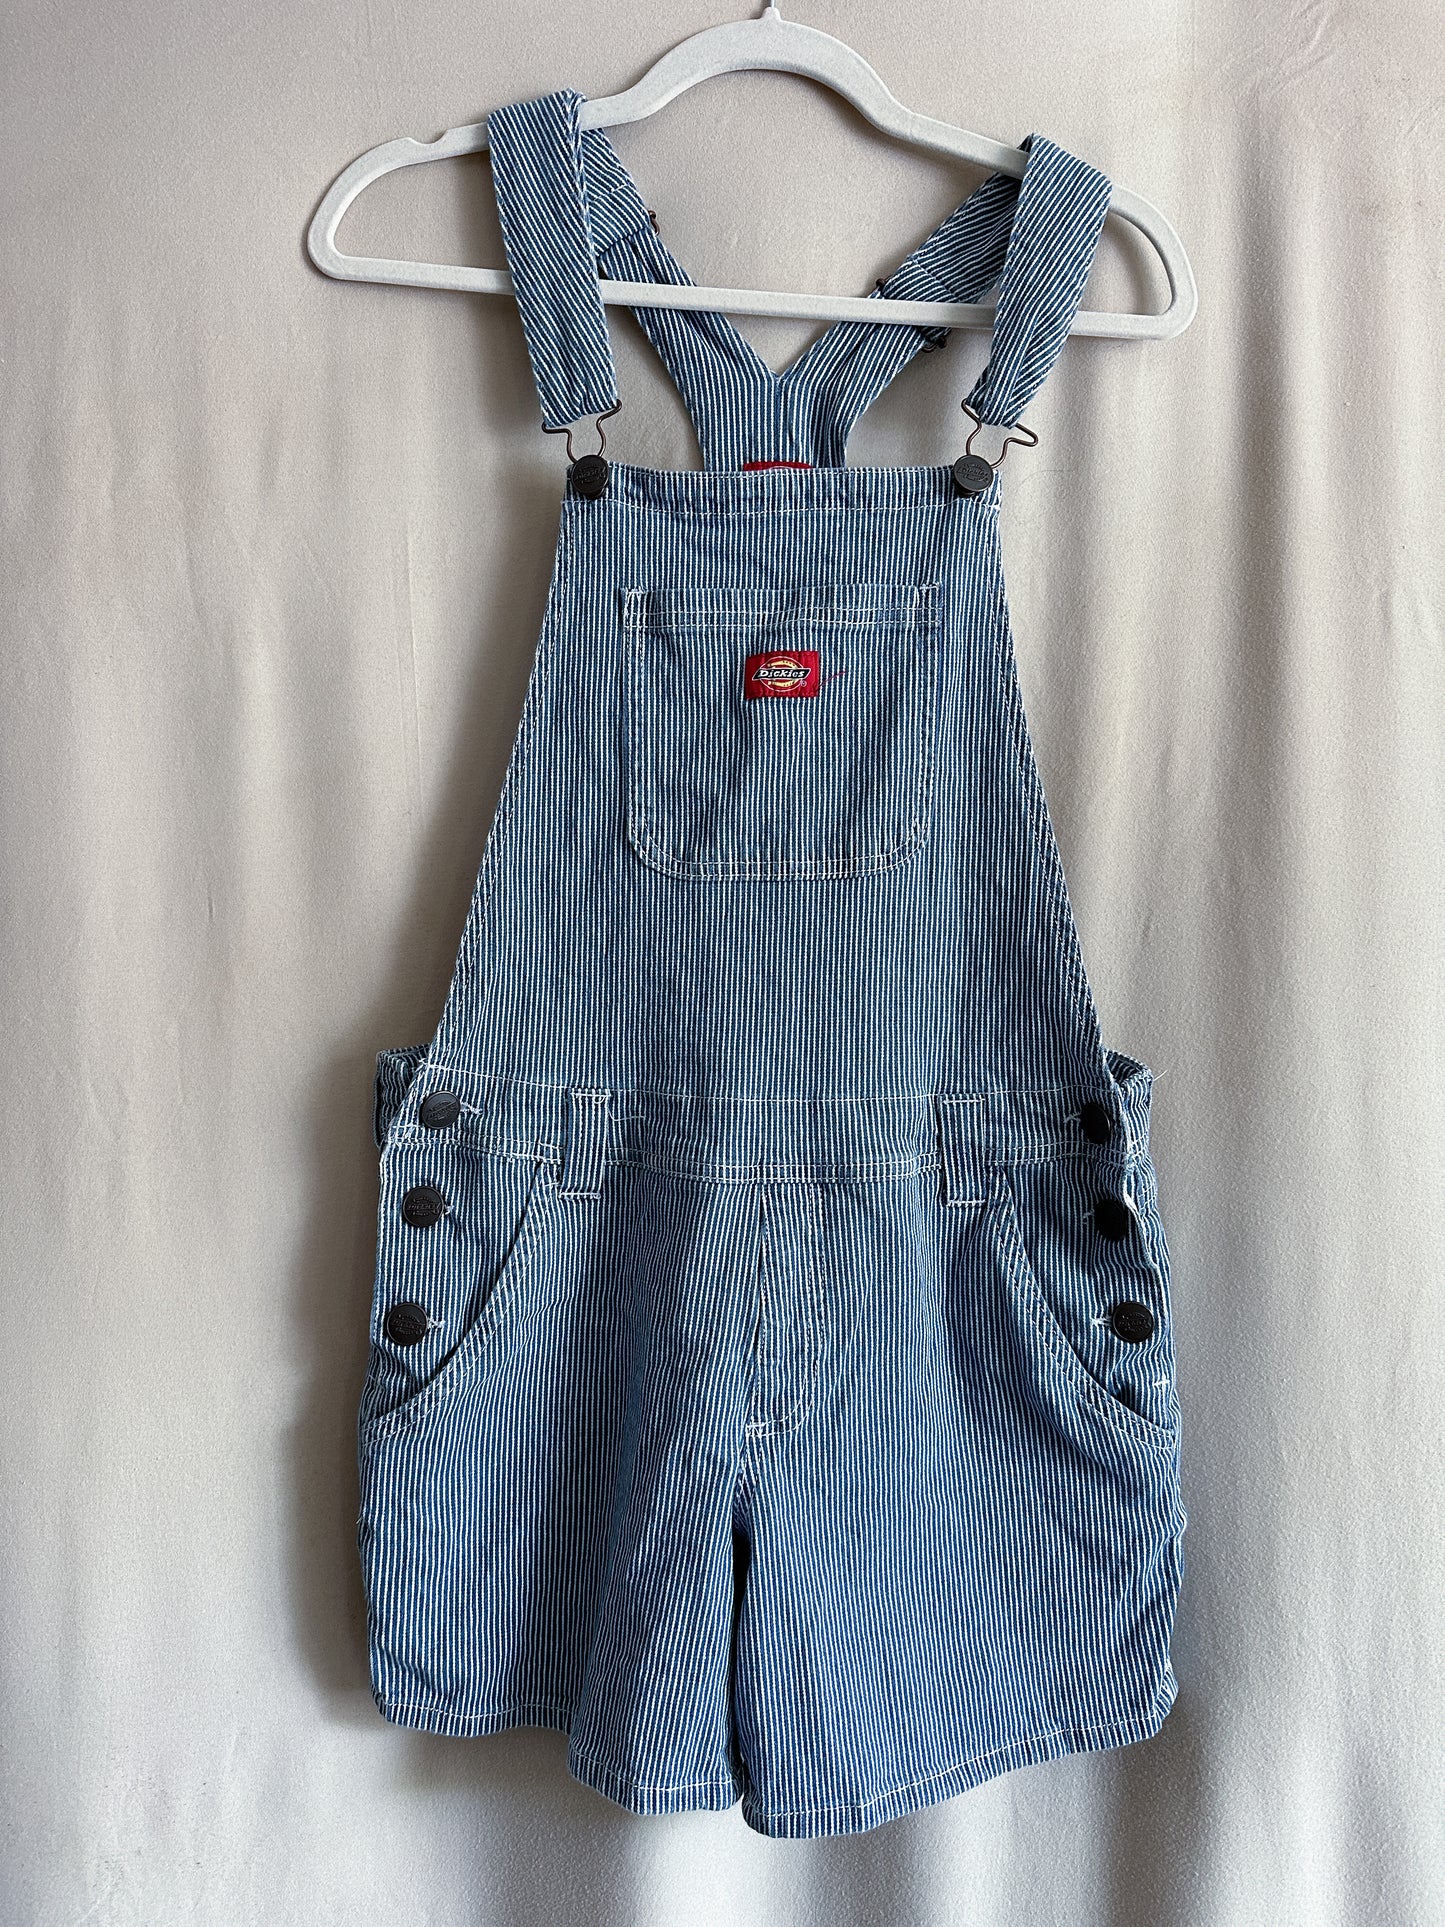 Dickies Striped Short Overalls (fits XS-S)